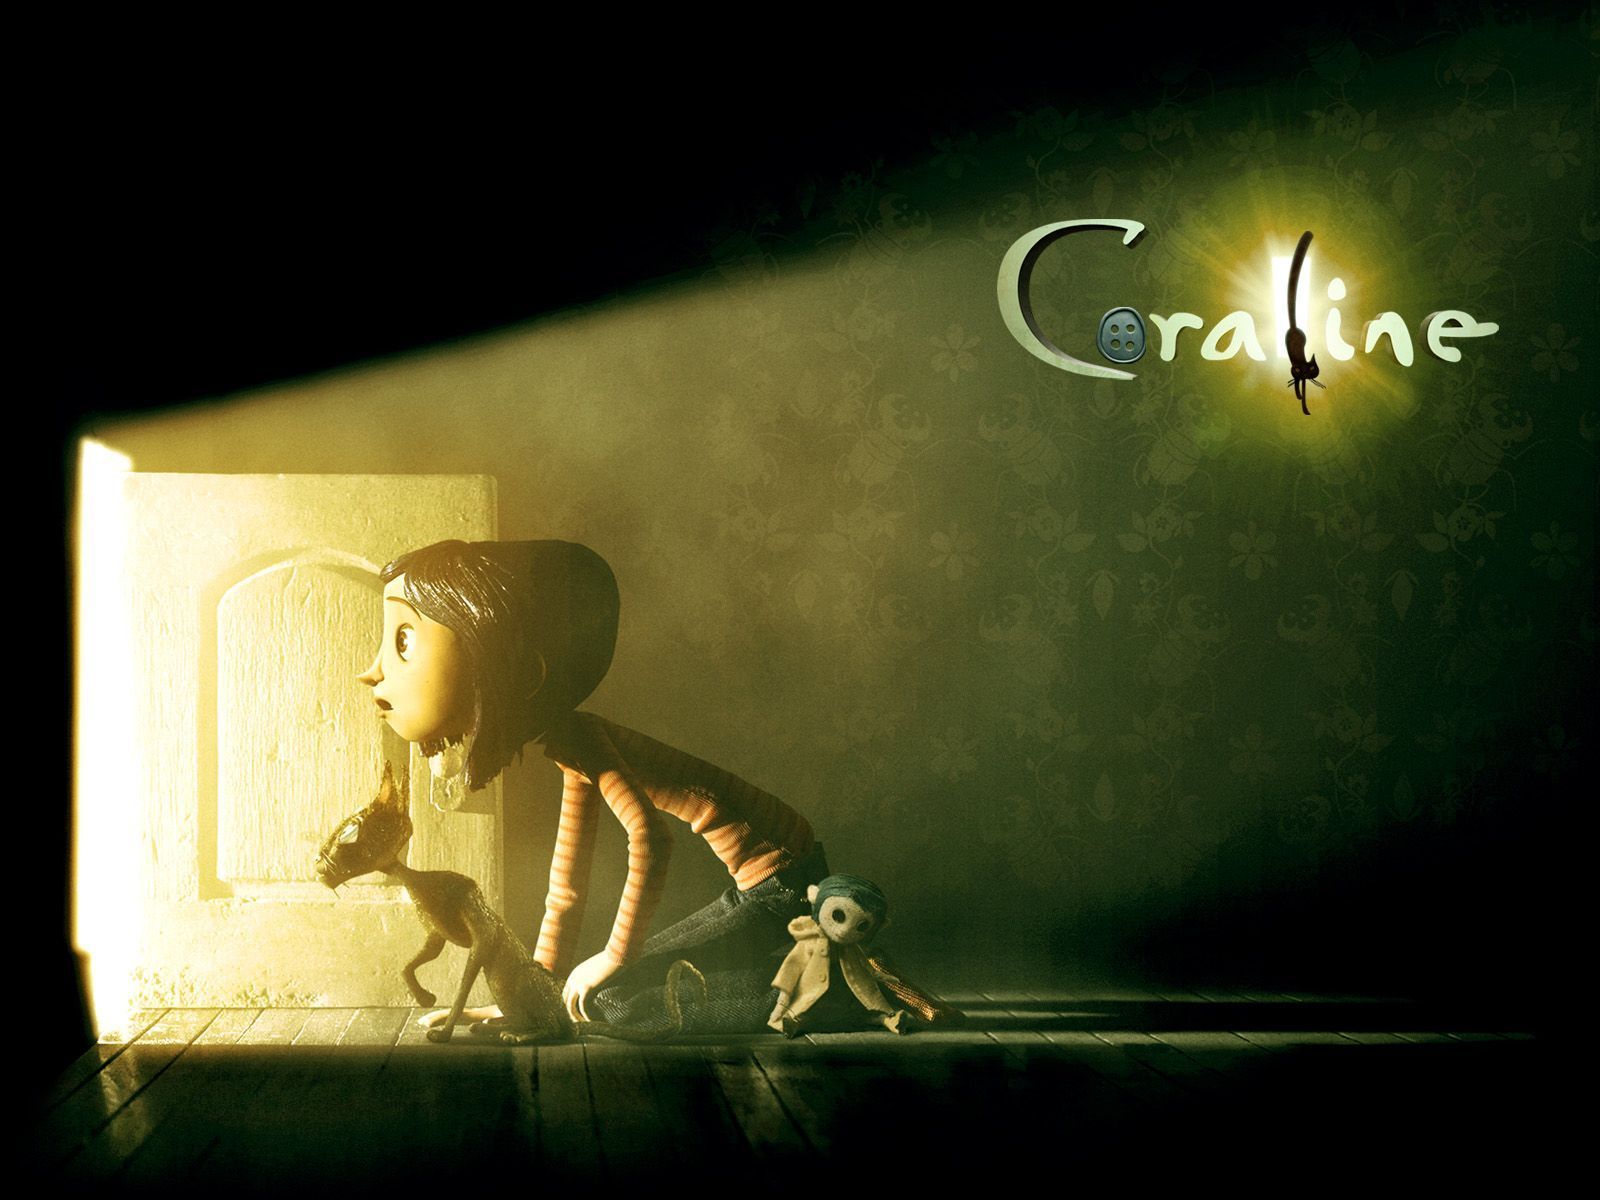 Coraline wallpapers and images - wallpapers, pictures, photos